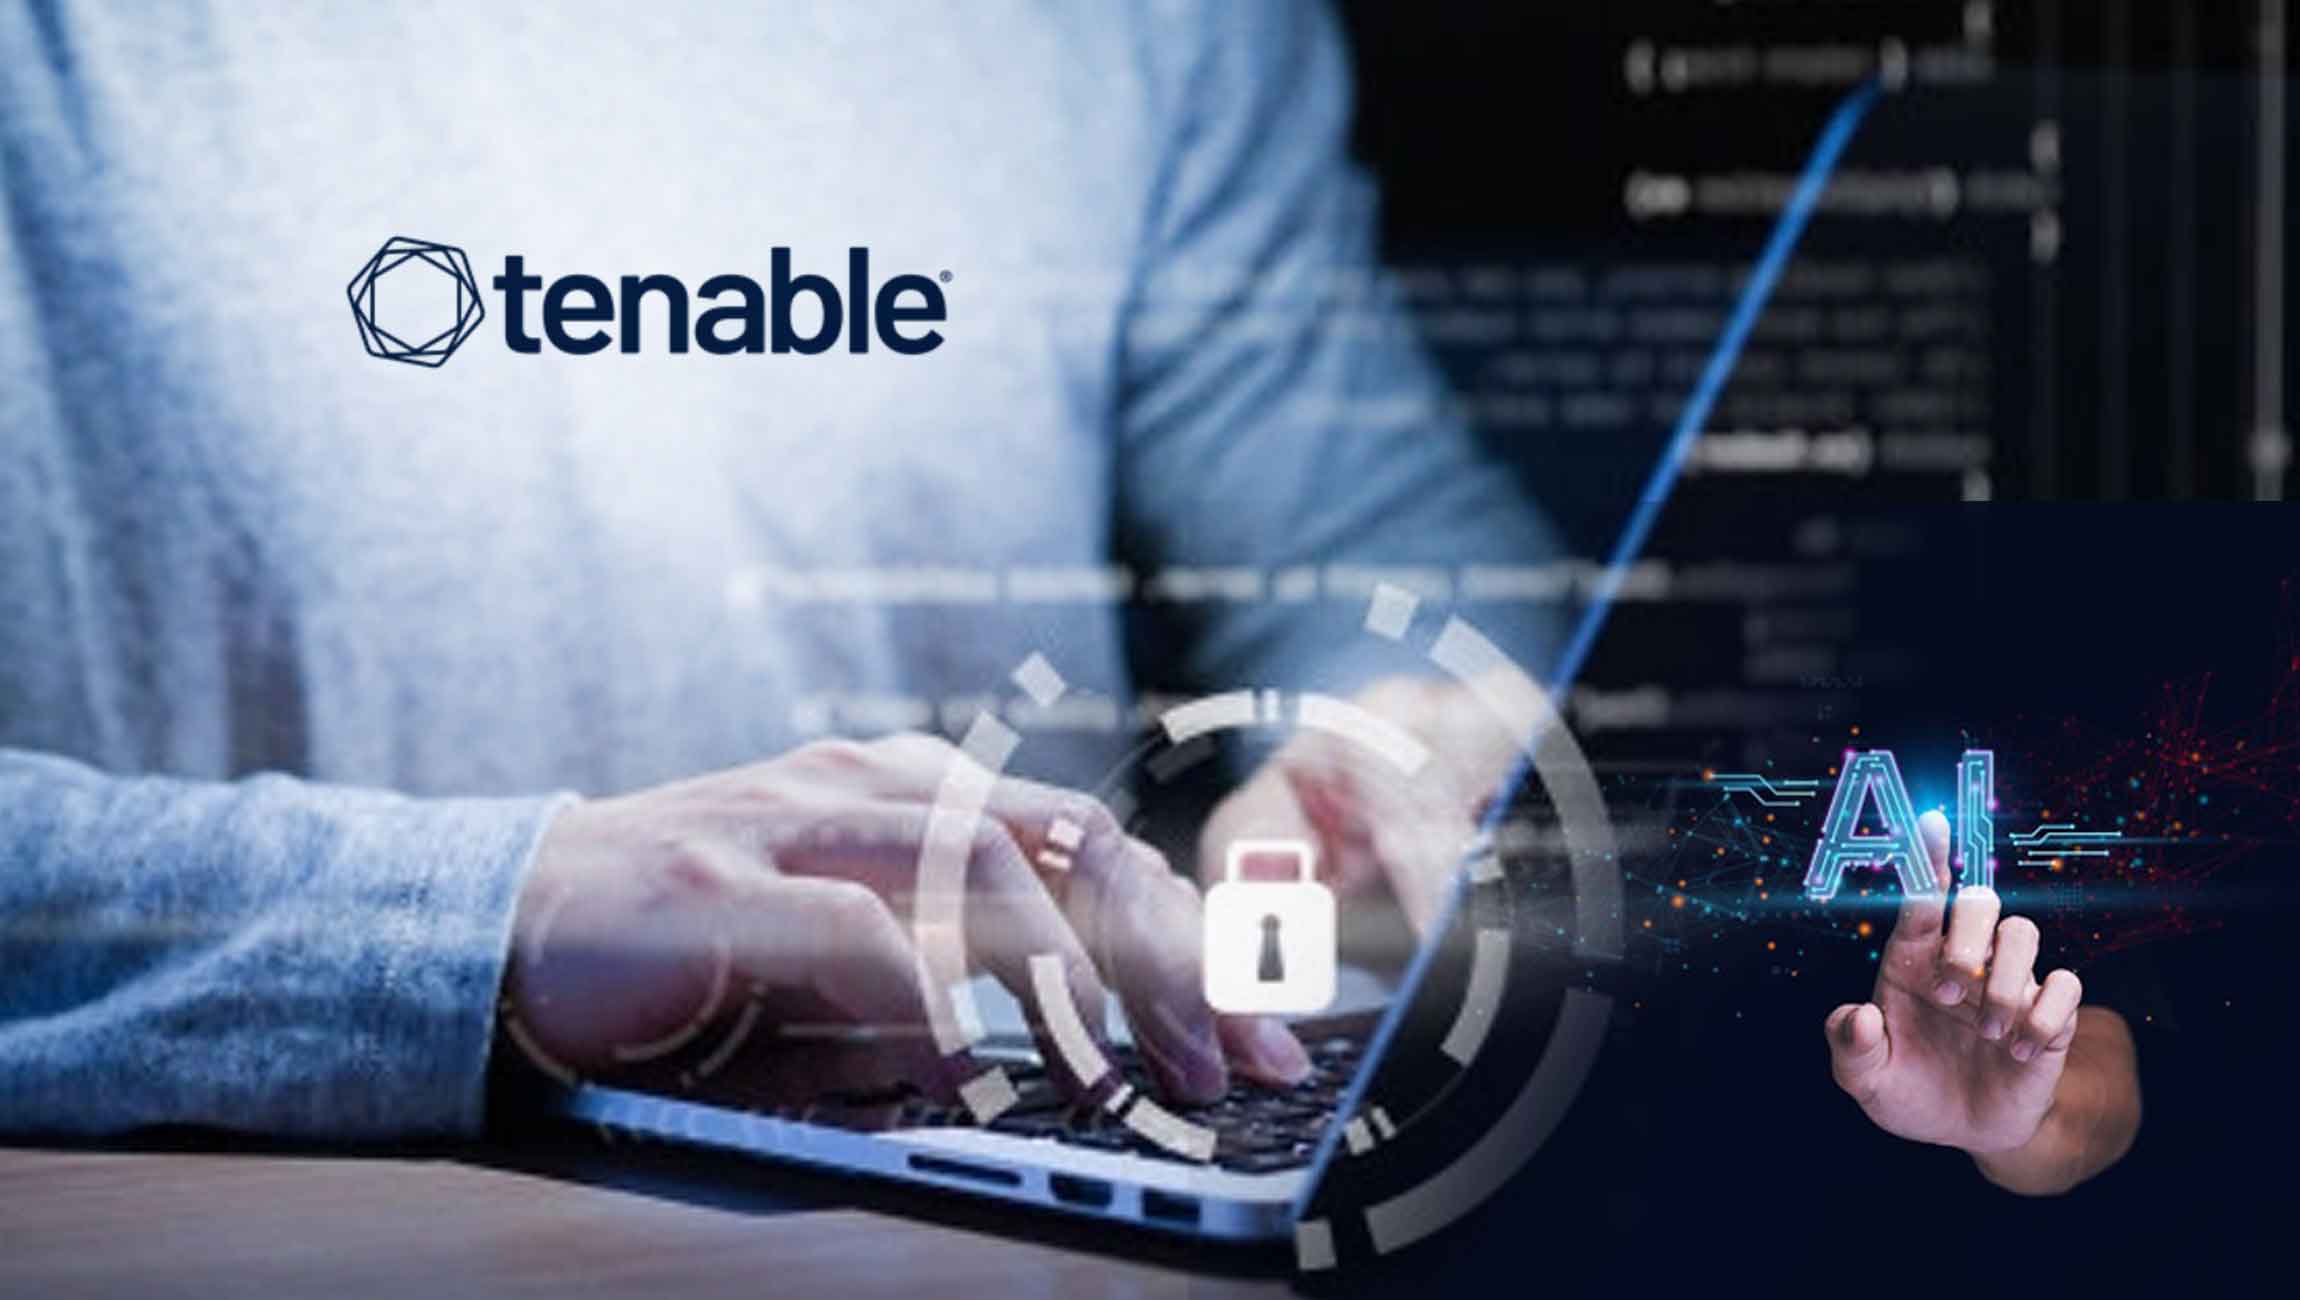 Tenable Announced ExposureAI to Quickly Identify and Mitigate Cyber Risks